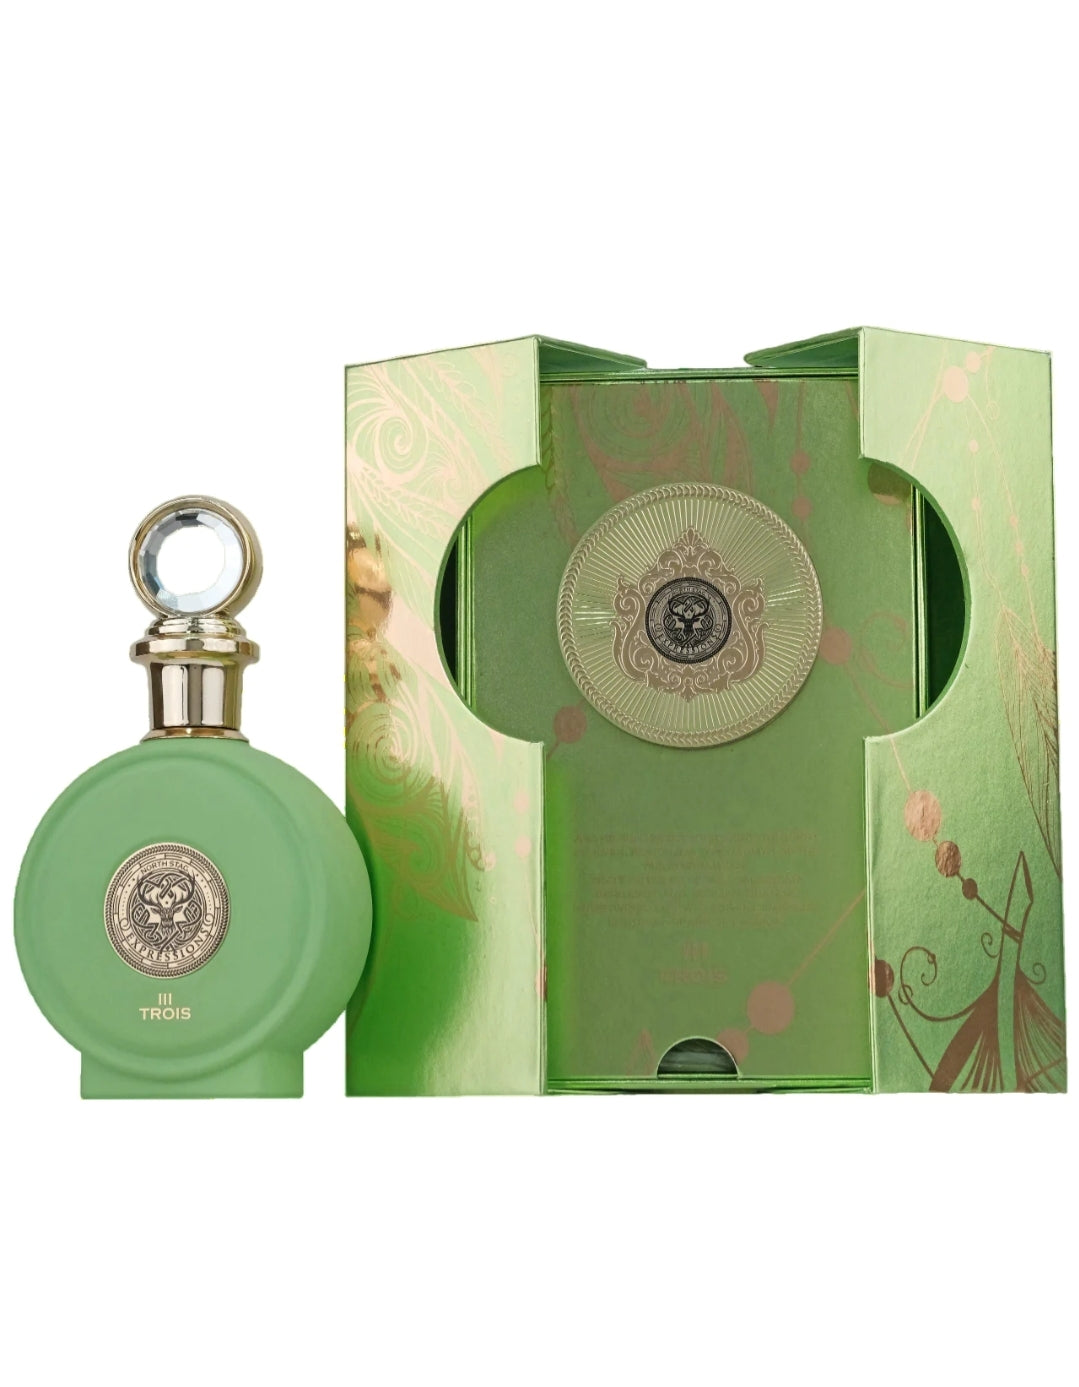 North Stag Expression Trois III edp  - Emir